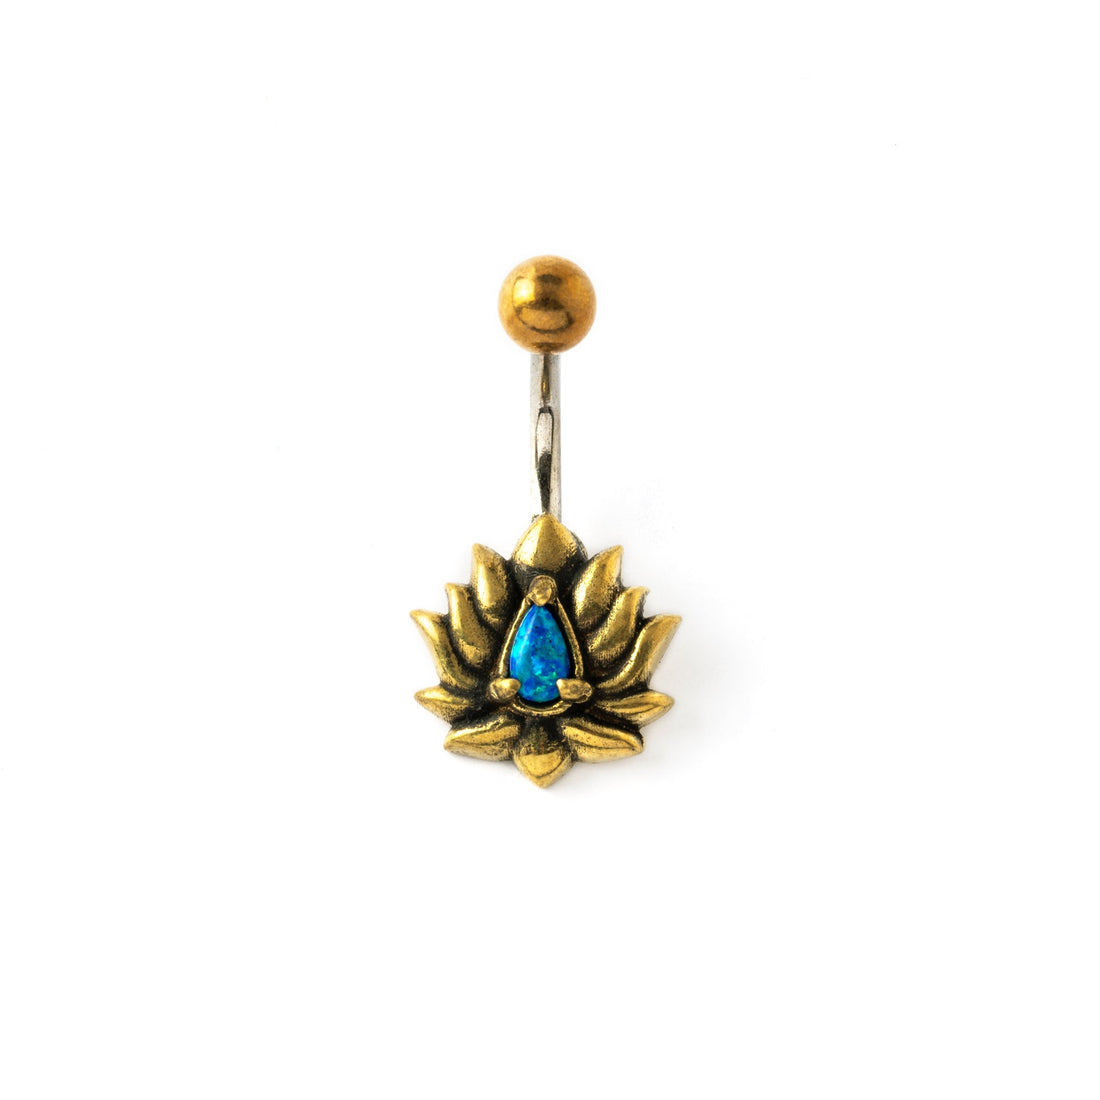 Oxidised golden brass lotus flower belly bar with Blue Opal frontal view